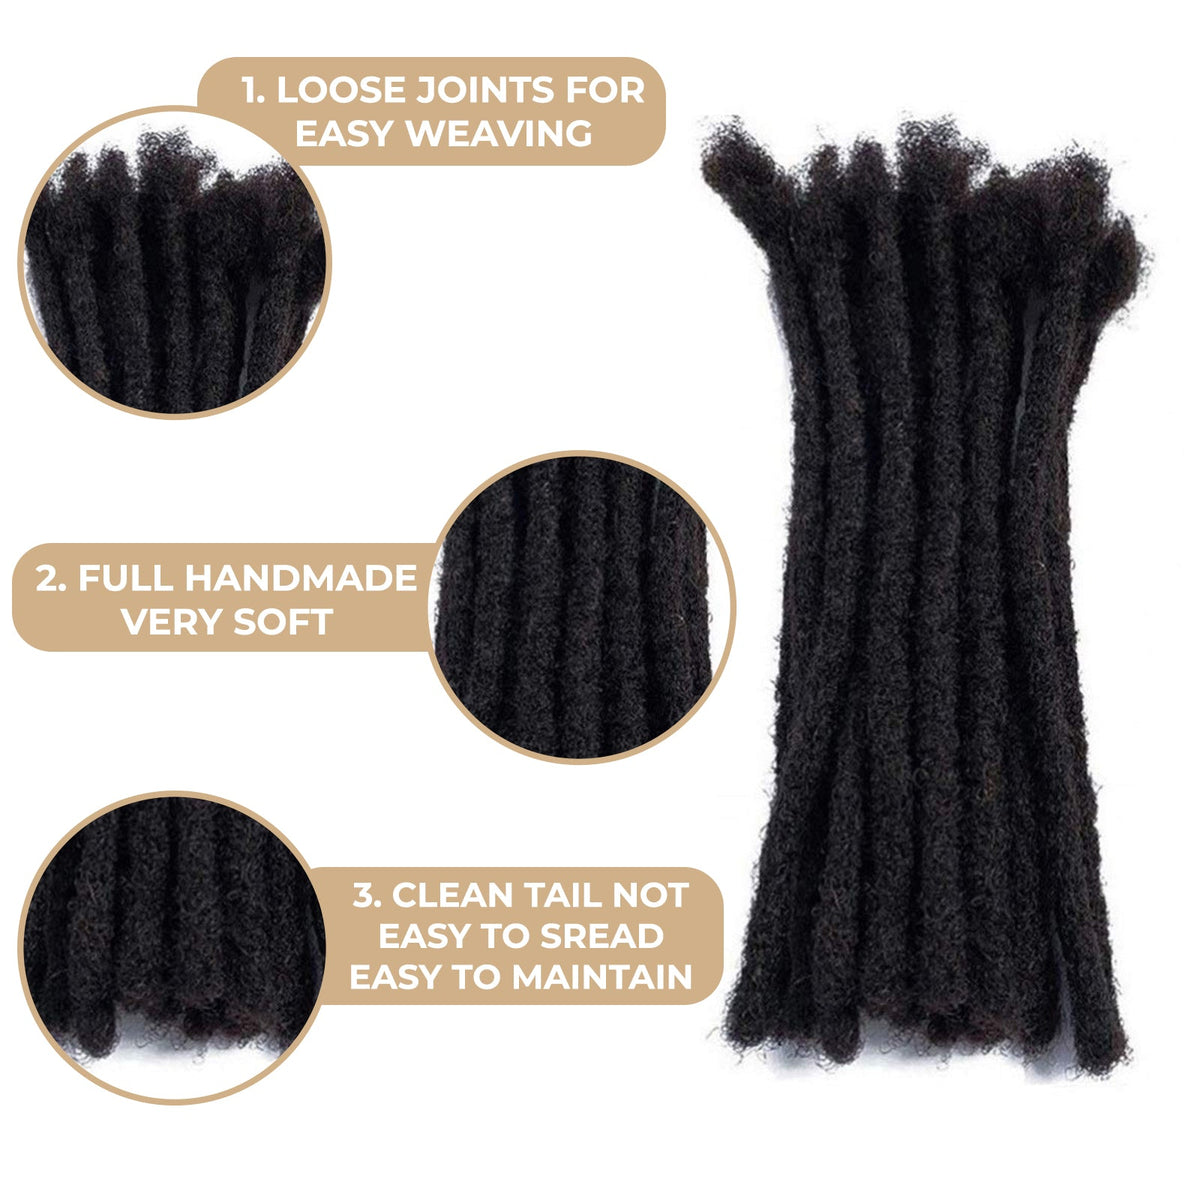 100% Human Hair Dreadlock Extensions 16Inch 10 Strands Handmade Natural Loc Extensions Human Hair Bundle Dreads Extensions For Woman&Men Can be Dyed & Bleached Natural Black 16inch length 0.8cm Width